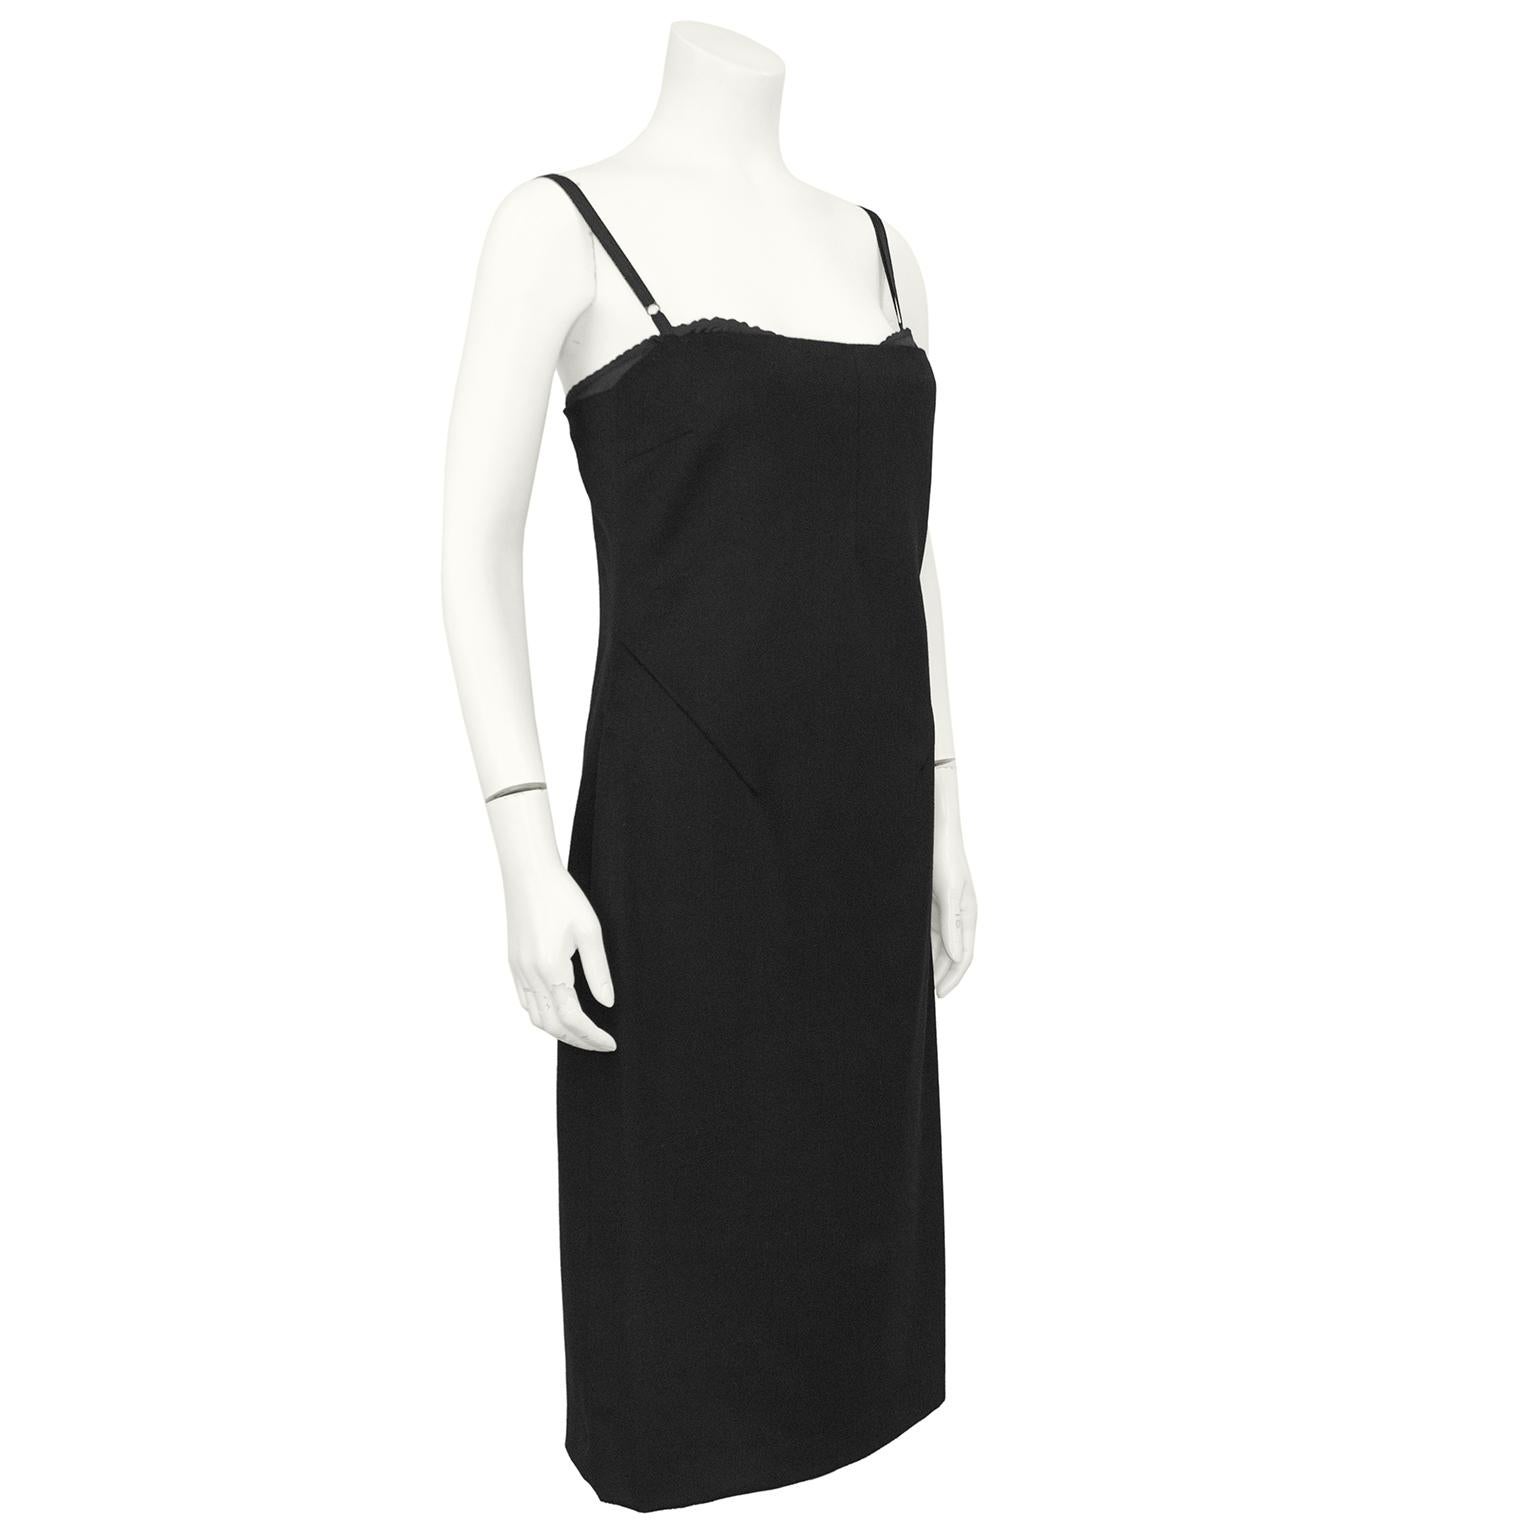 Sleek and sexy Dolce and Gabbana black cashmere cocktail dress from the 1990s. The dress skims the body beautifully and has a straight neckline. The top of an inserted black silk bra is visible with adjustable spaghetti straps. Beautiful seam work